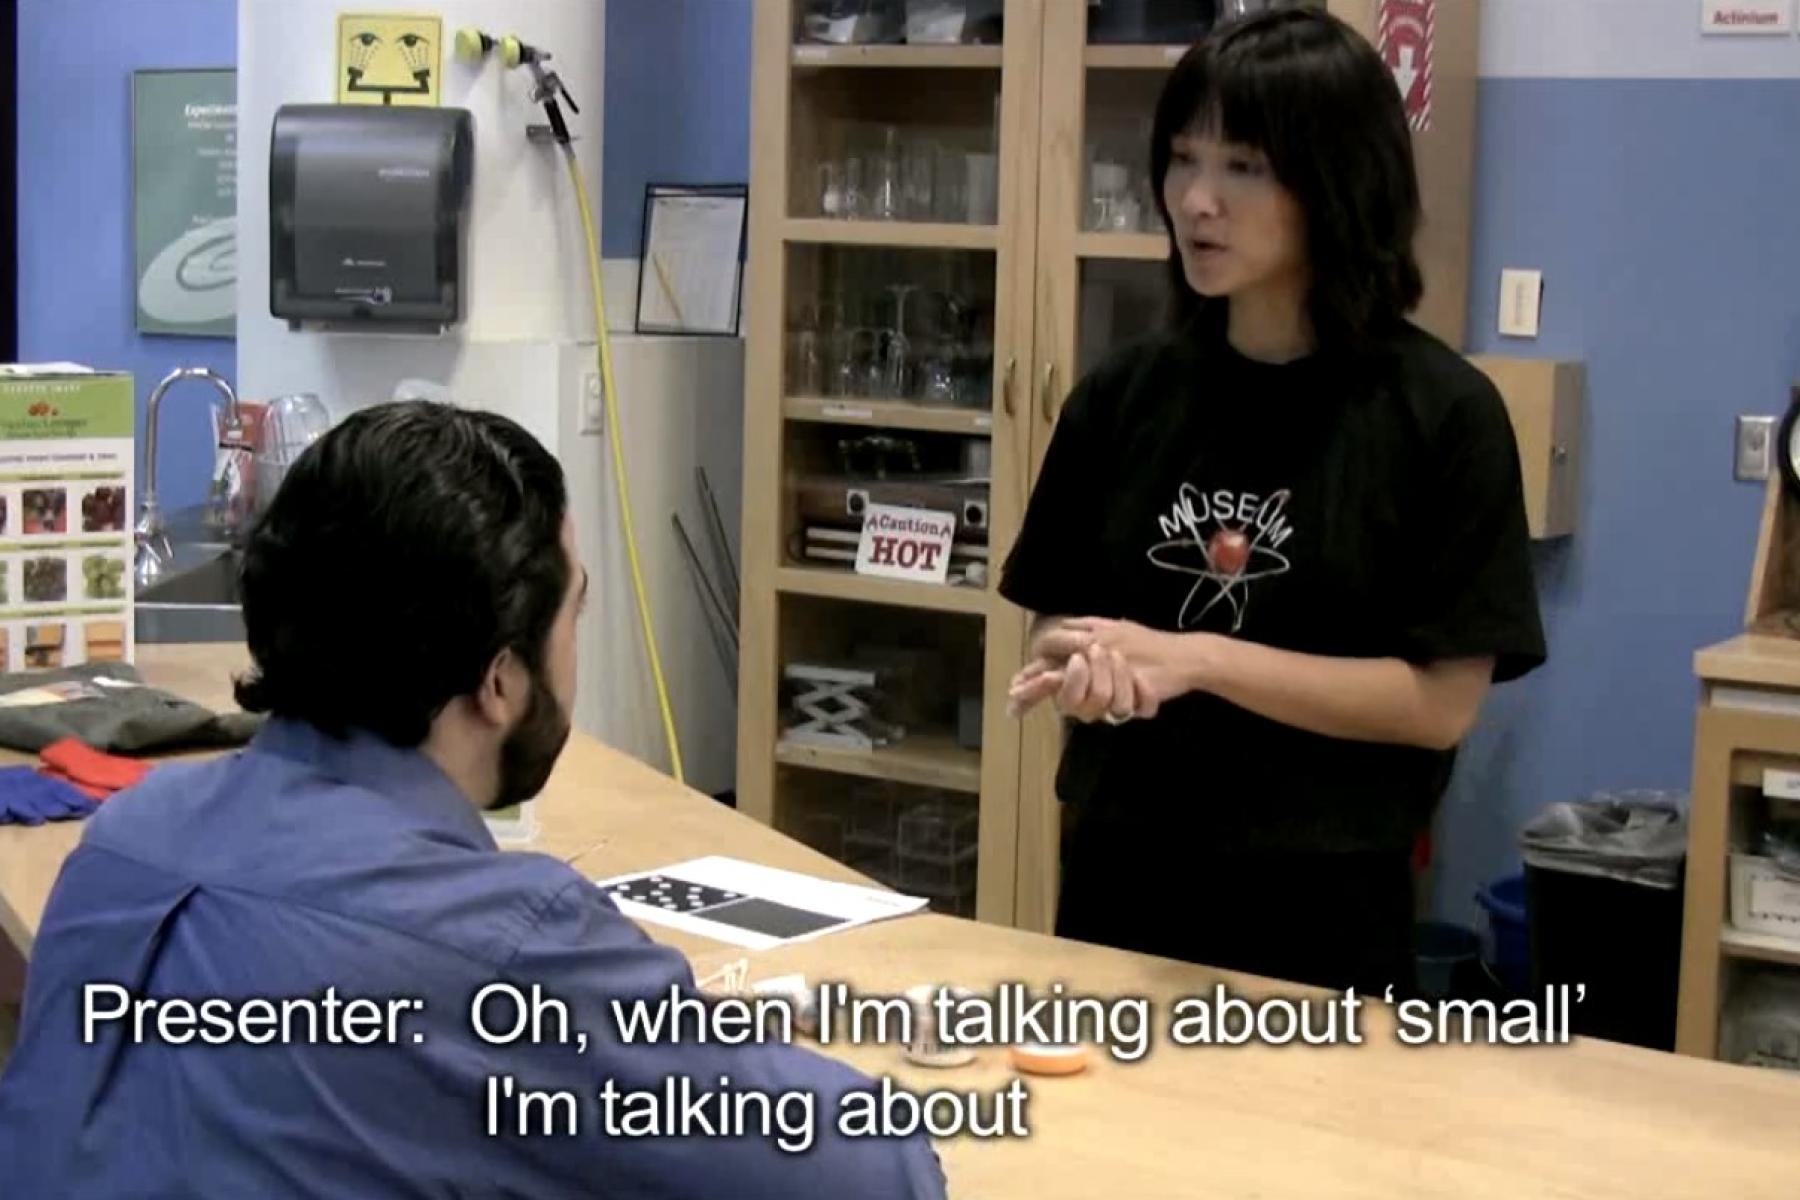 A video still of a museum presenter in a black shirt talking to a museum visitor in a blue shirt